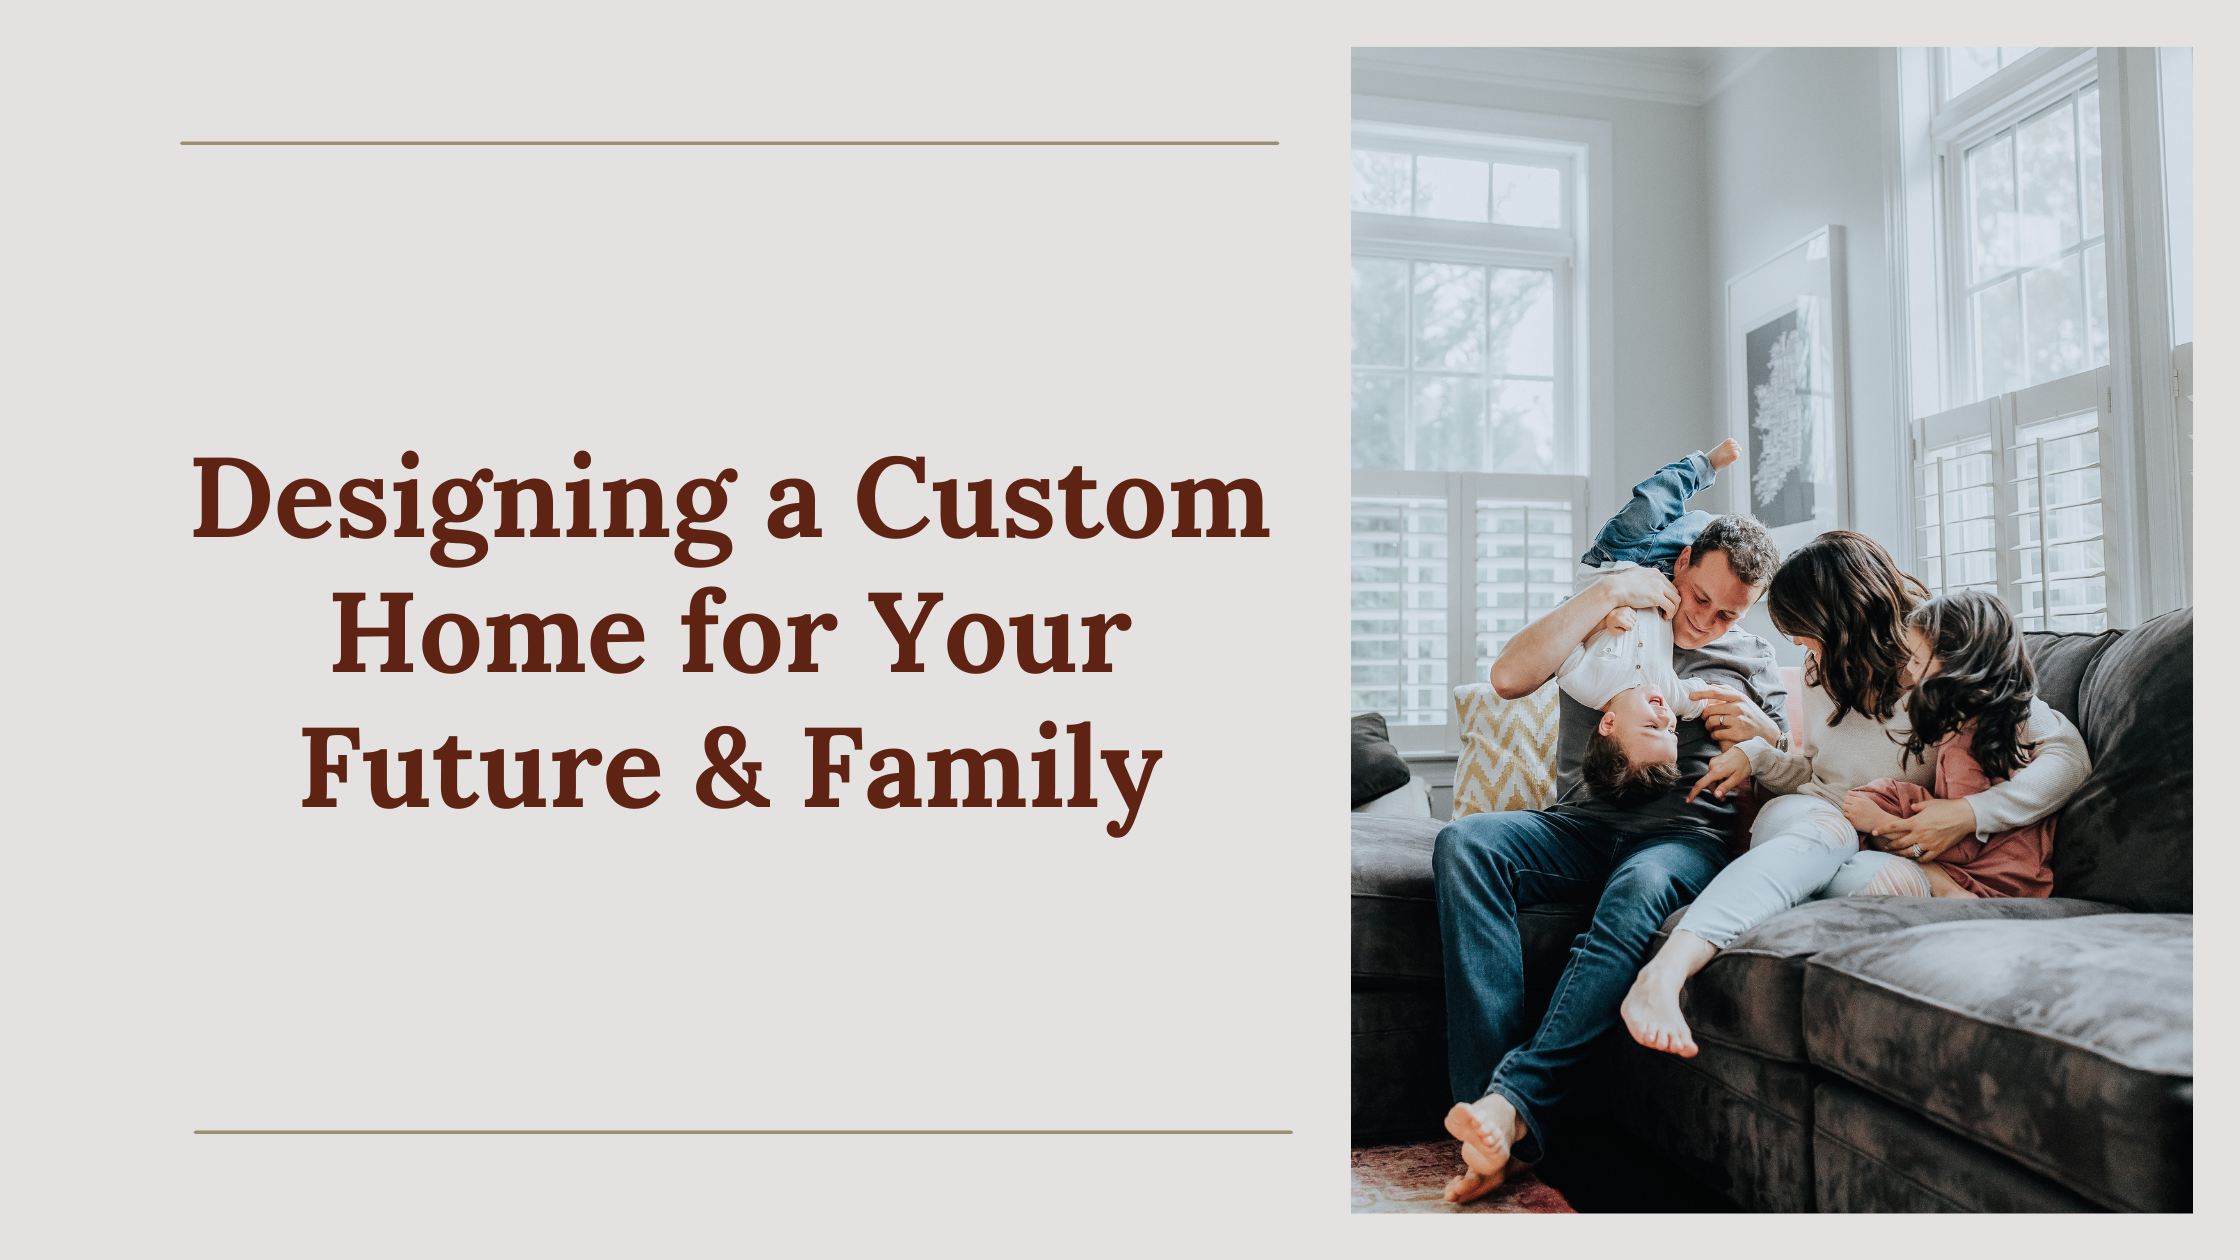 Designing a Custom Home for Your Future & Family